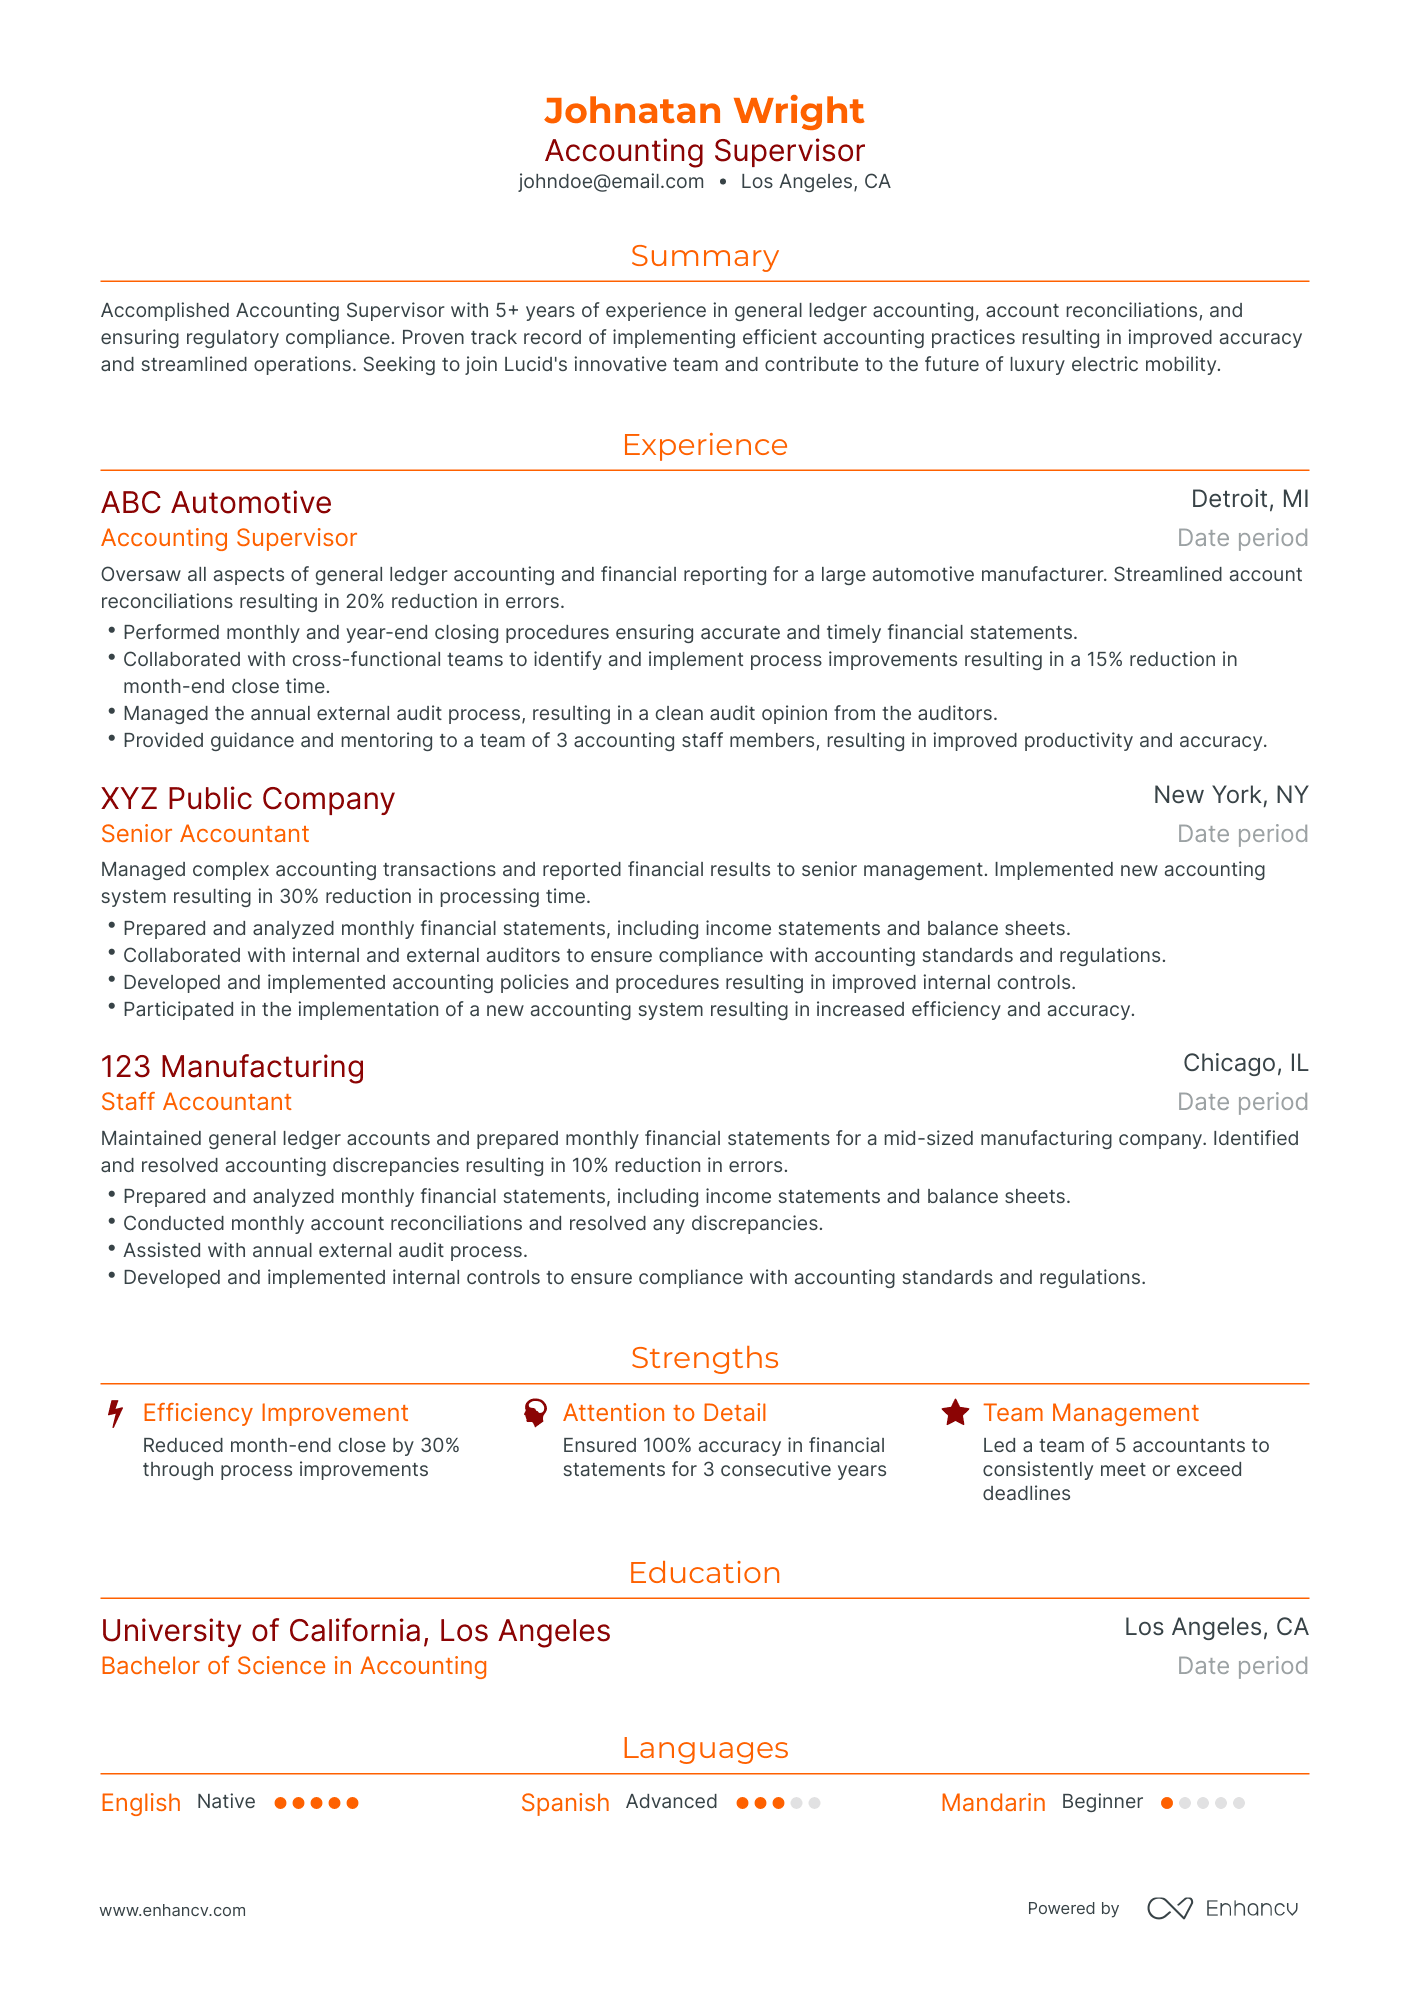 Traditional Accounting Supervisor Resume Template